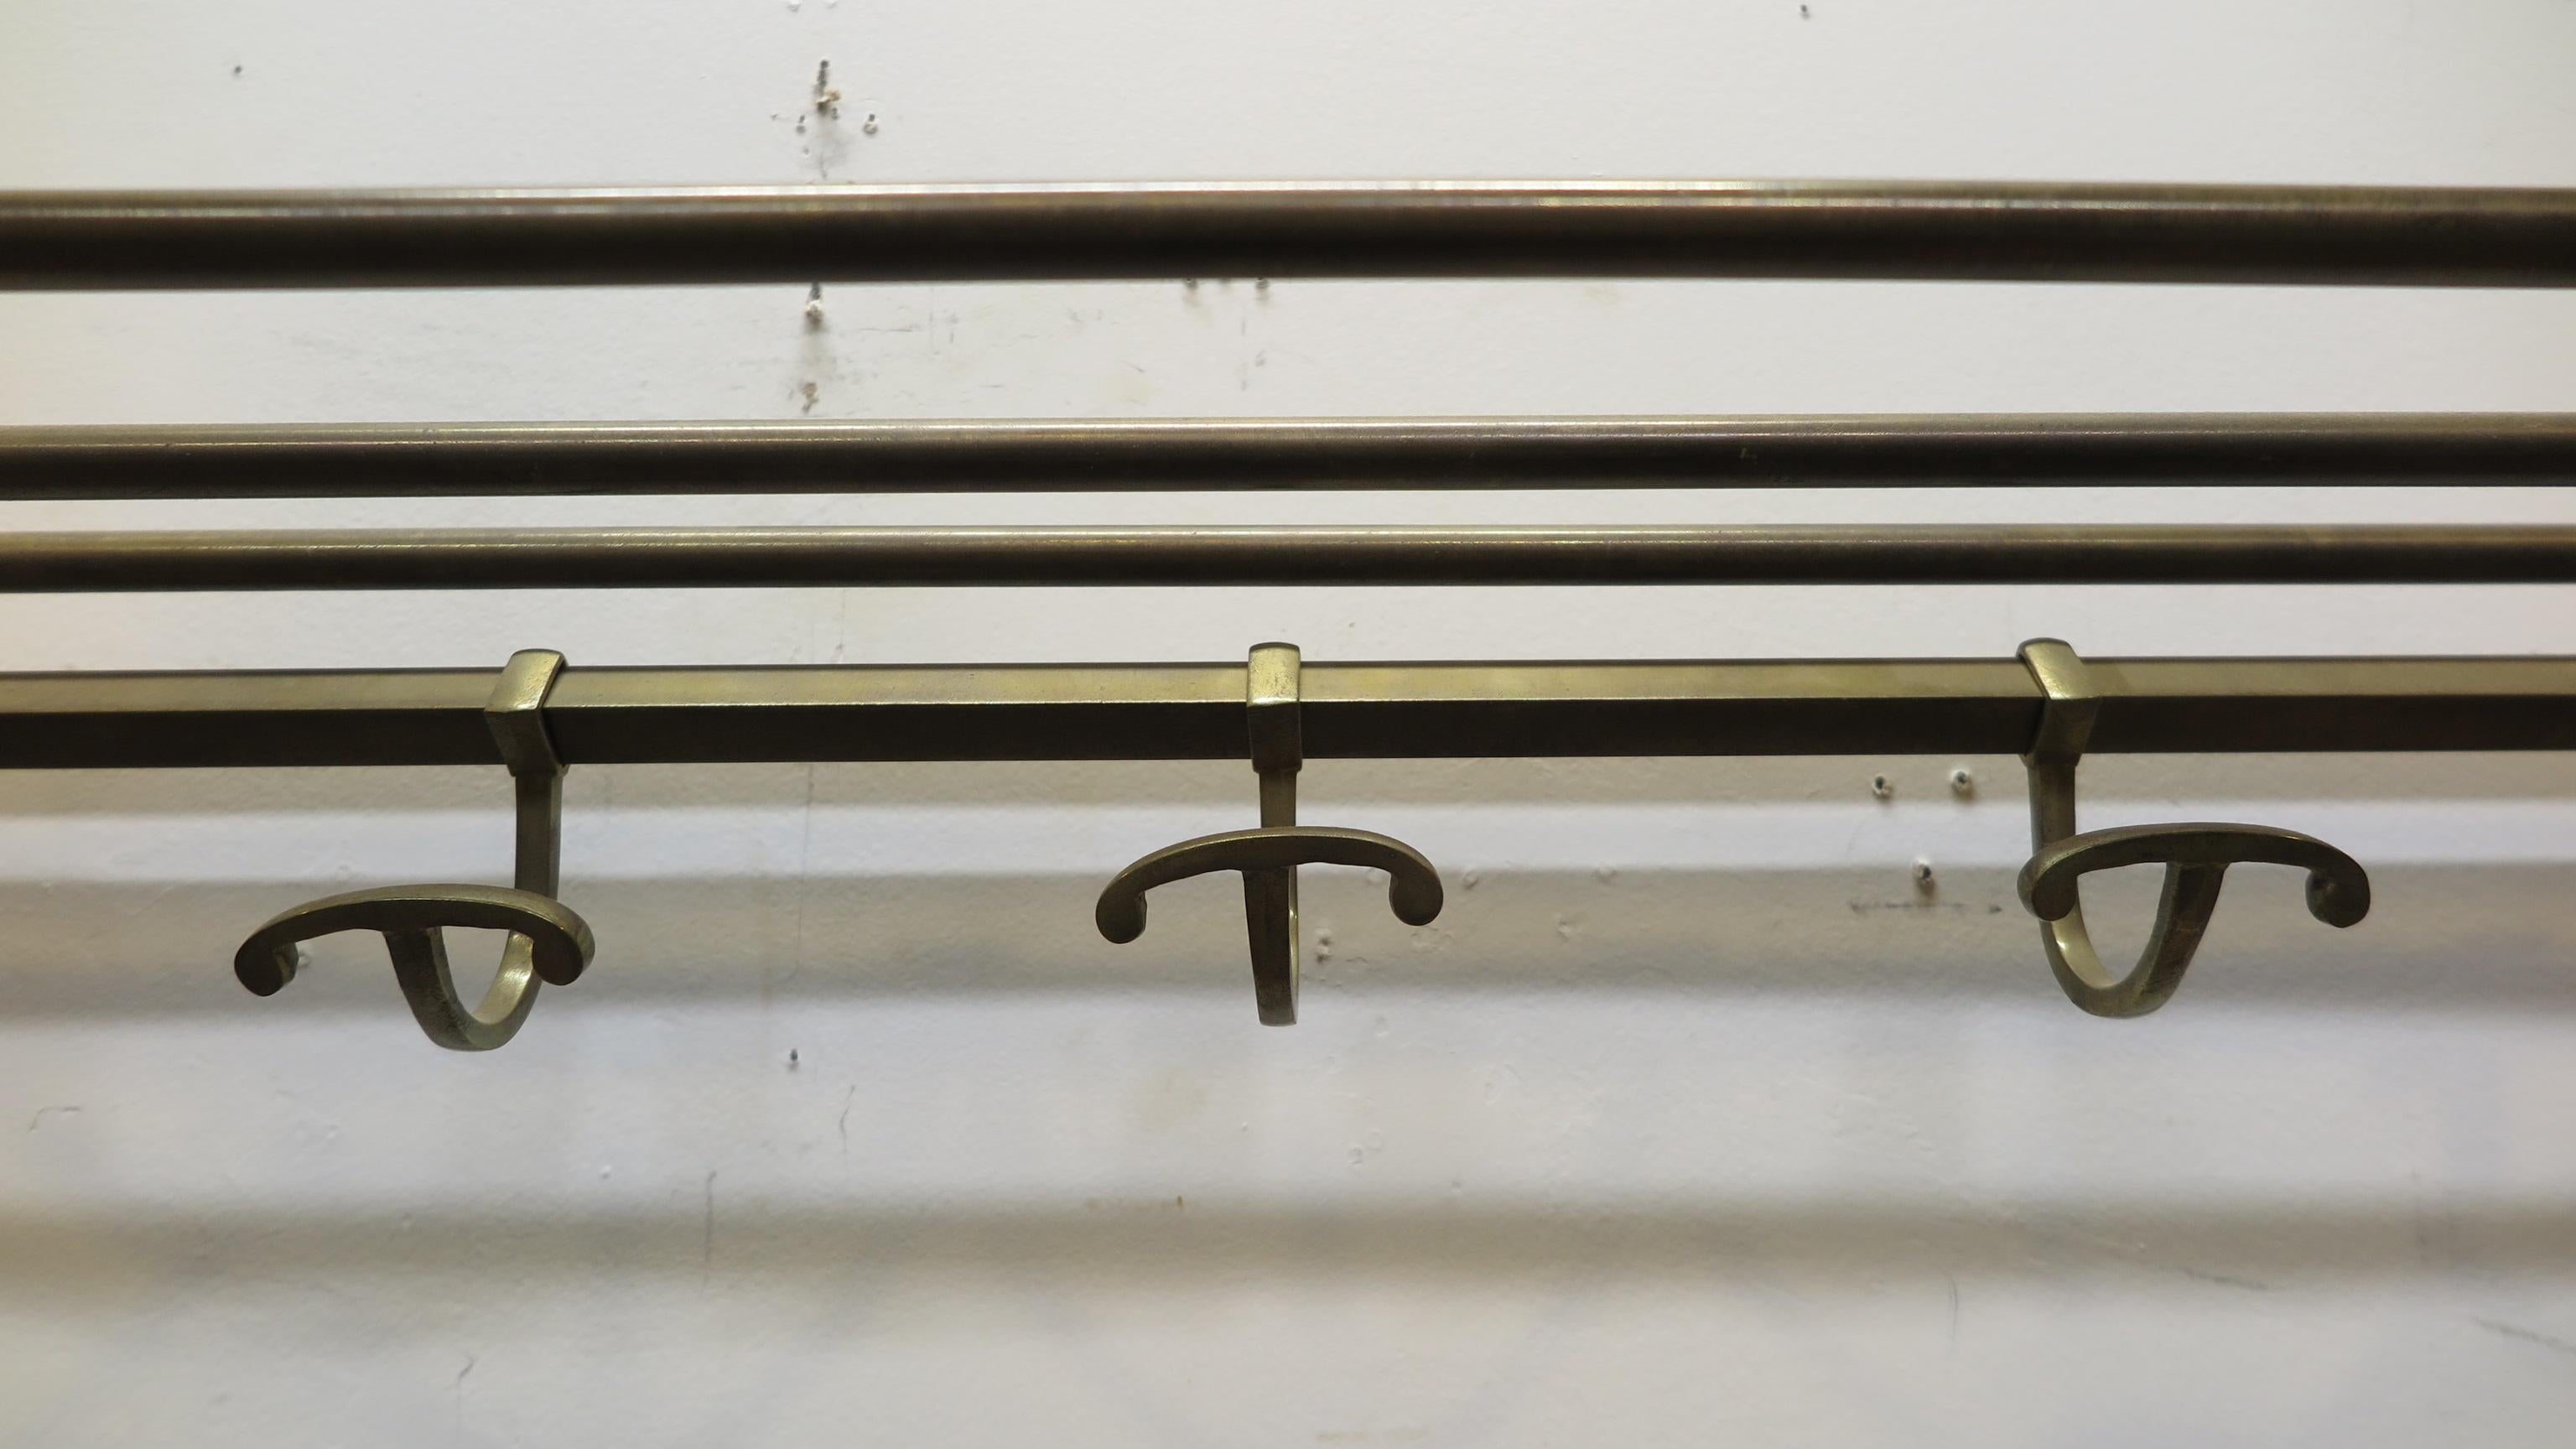 Antique French brass bistro coat rack. Hangers slide for positioning, shelf of brass rods on top.
In good condition brass has patina. Easily mounts to a wall, perfect for everyday use, France, 1910-1920.